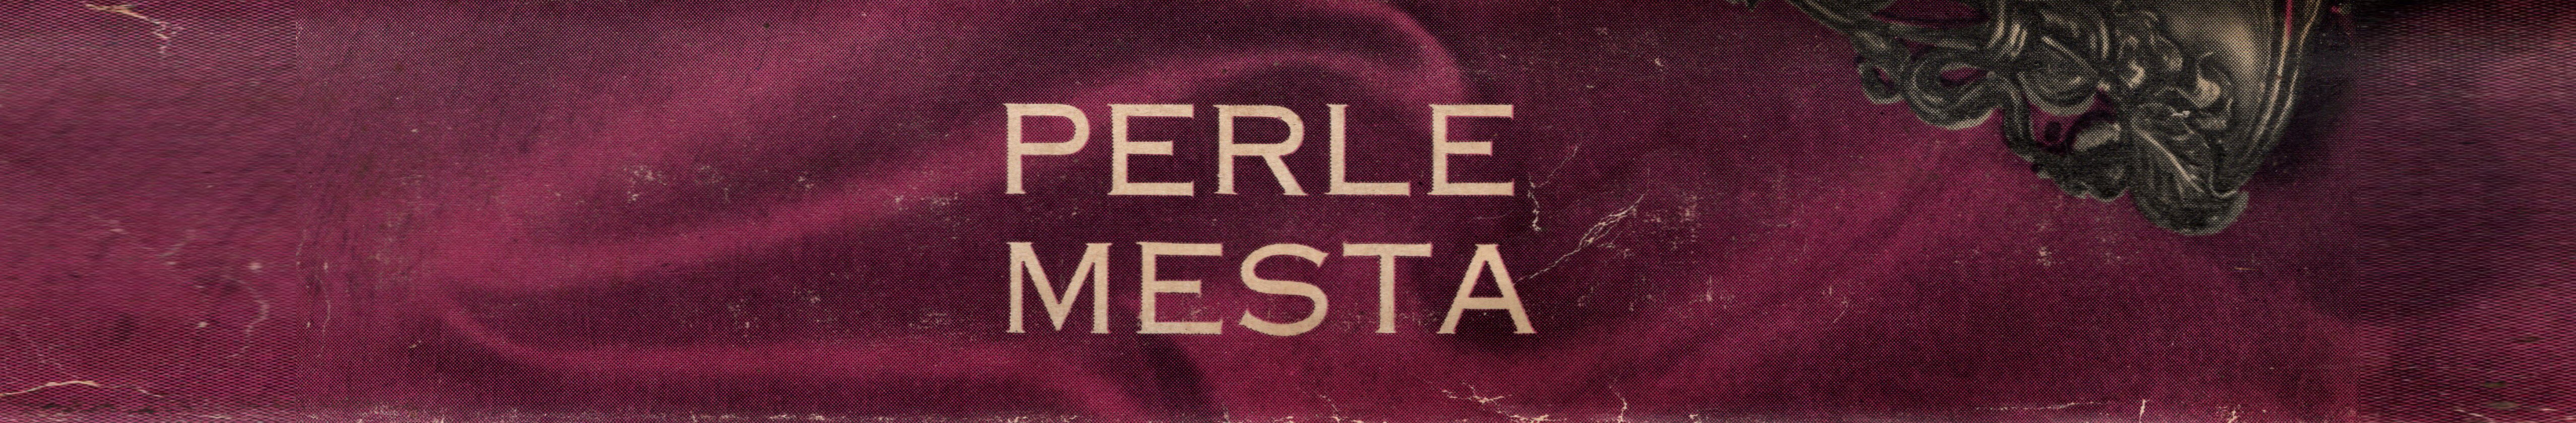 Image of the spine of Perle Mesta's 